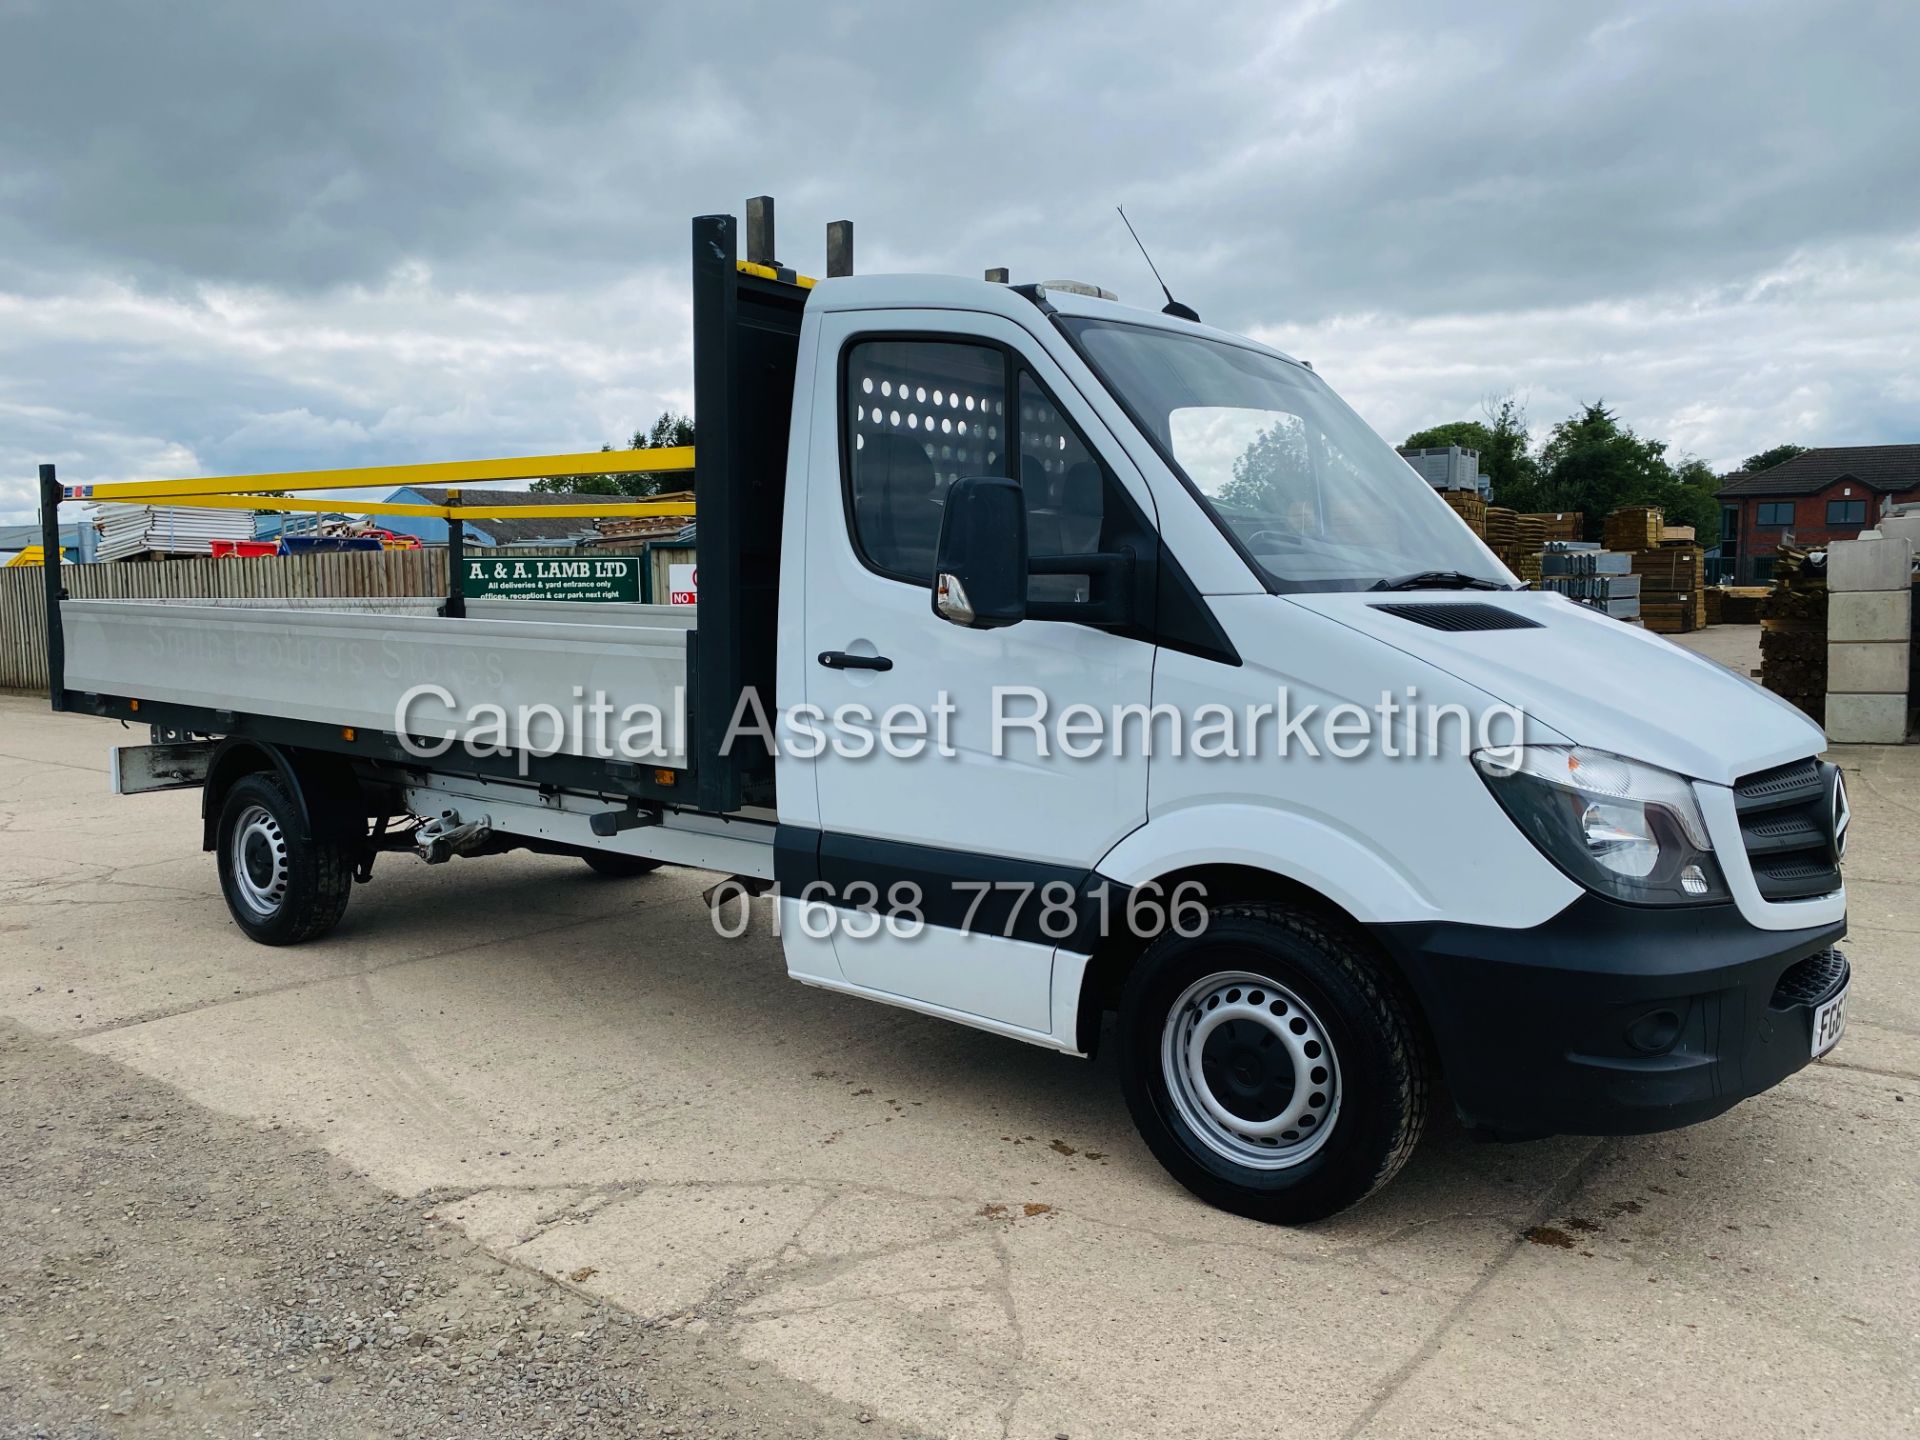 ON SALE MERCEDES SPRINTER 314CDI LWB DROPSIDE(2018 MODEL) 1 OWNER-14 FOOT ALLOY BODY-IDEAL SCAFFOLD - Image 6 of 17